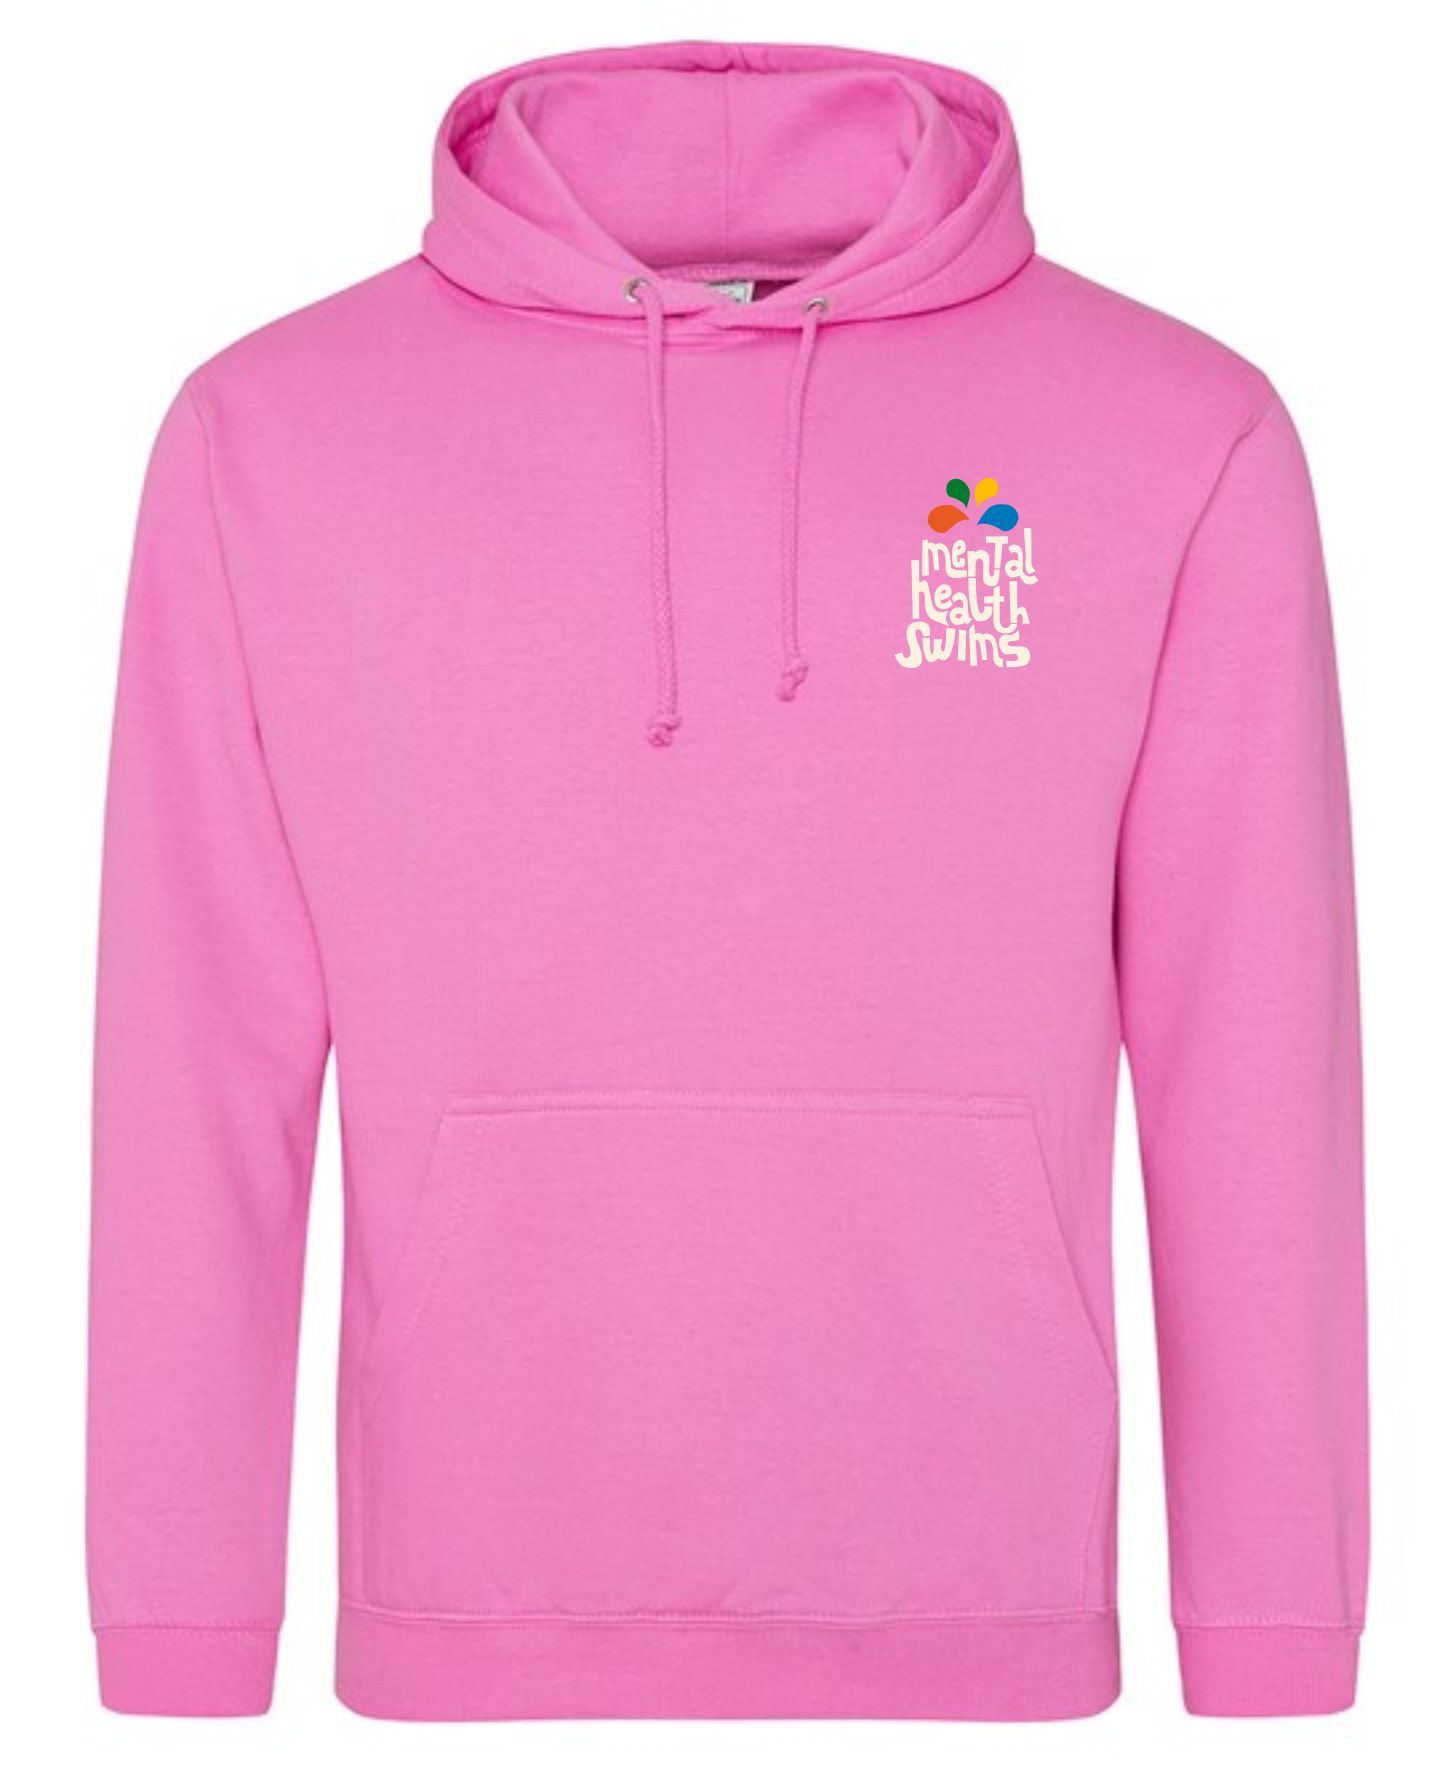 Mental Health Swims- 'Logo with Splashes' Candyfloss Pink Hoodie (Unisex)